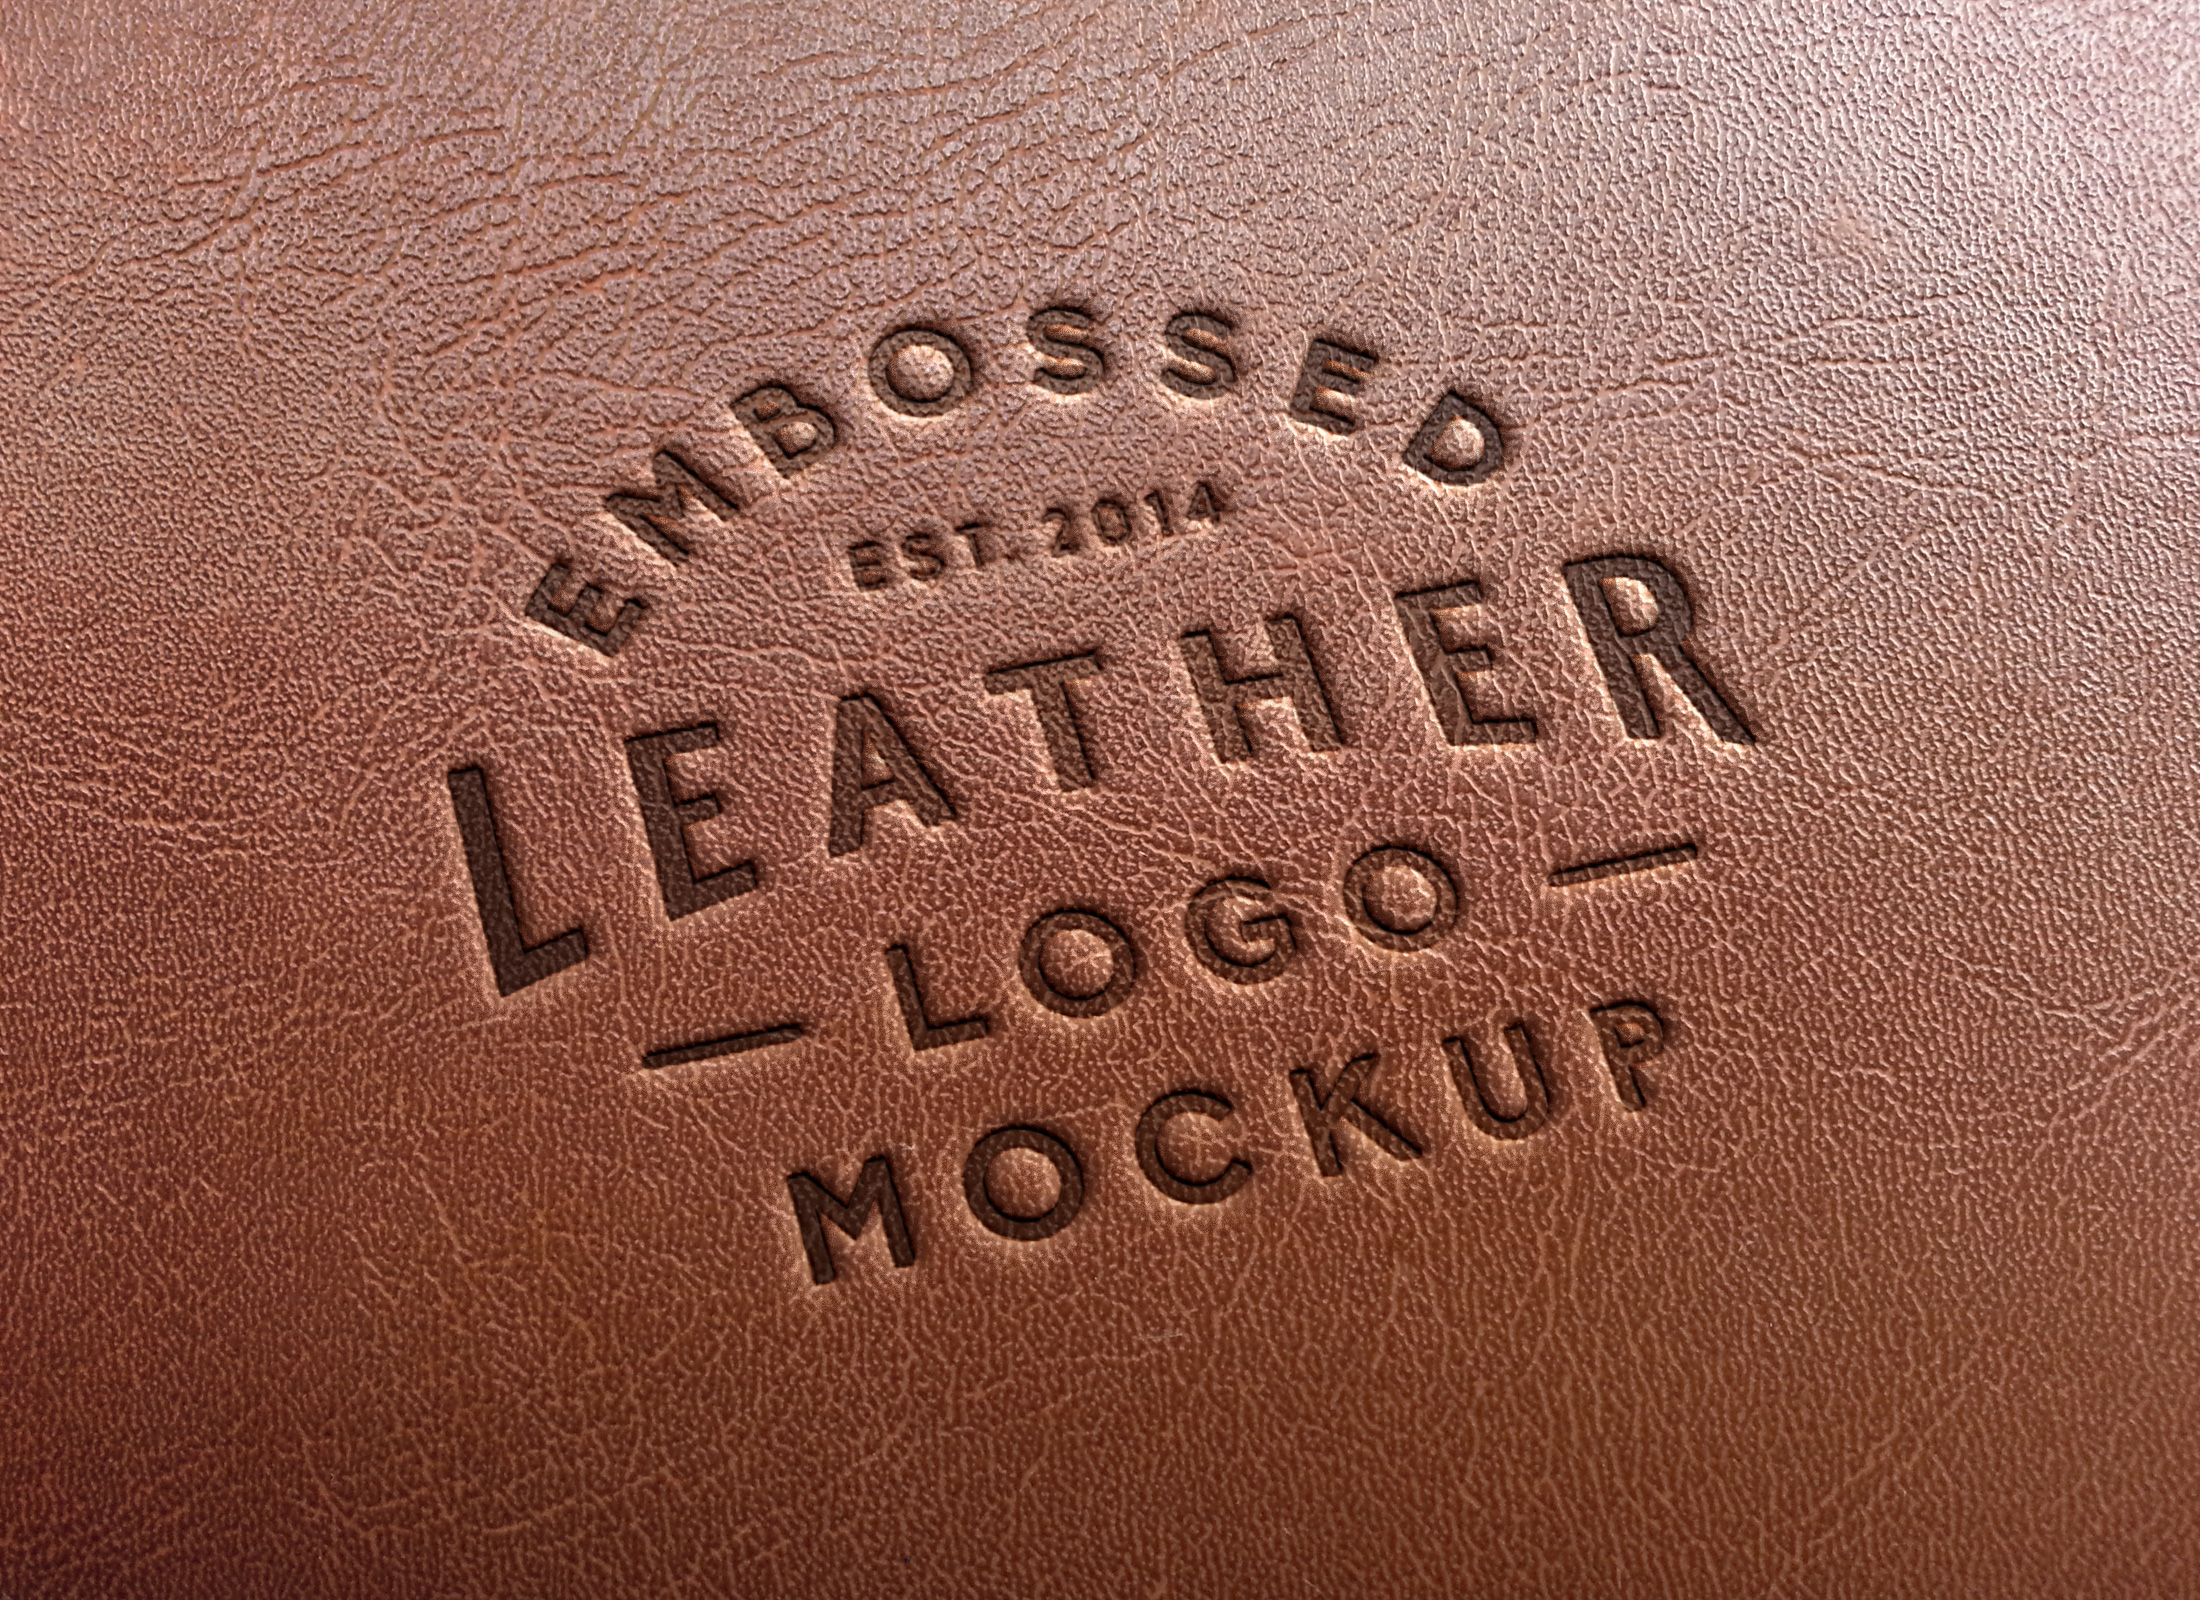 Leather Stamping Logo MockUp #2 | GraphicBurger